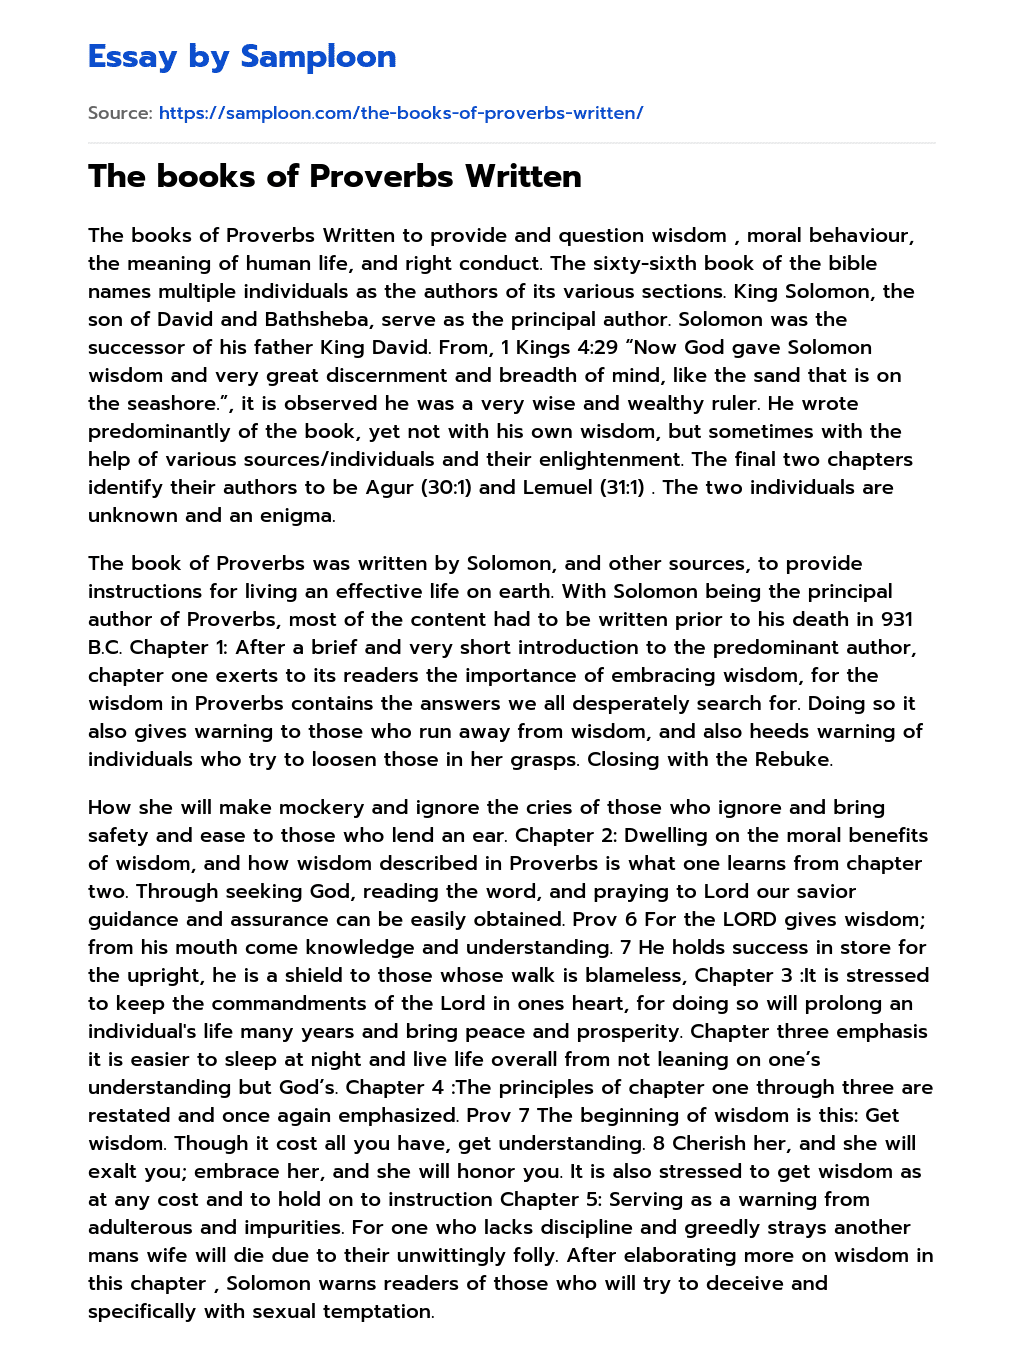 The books of Proverbs Written essay